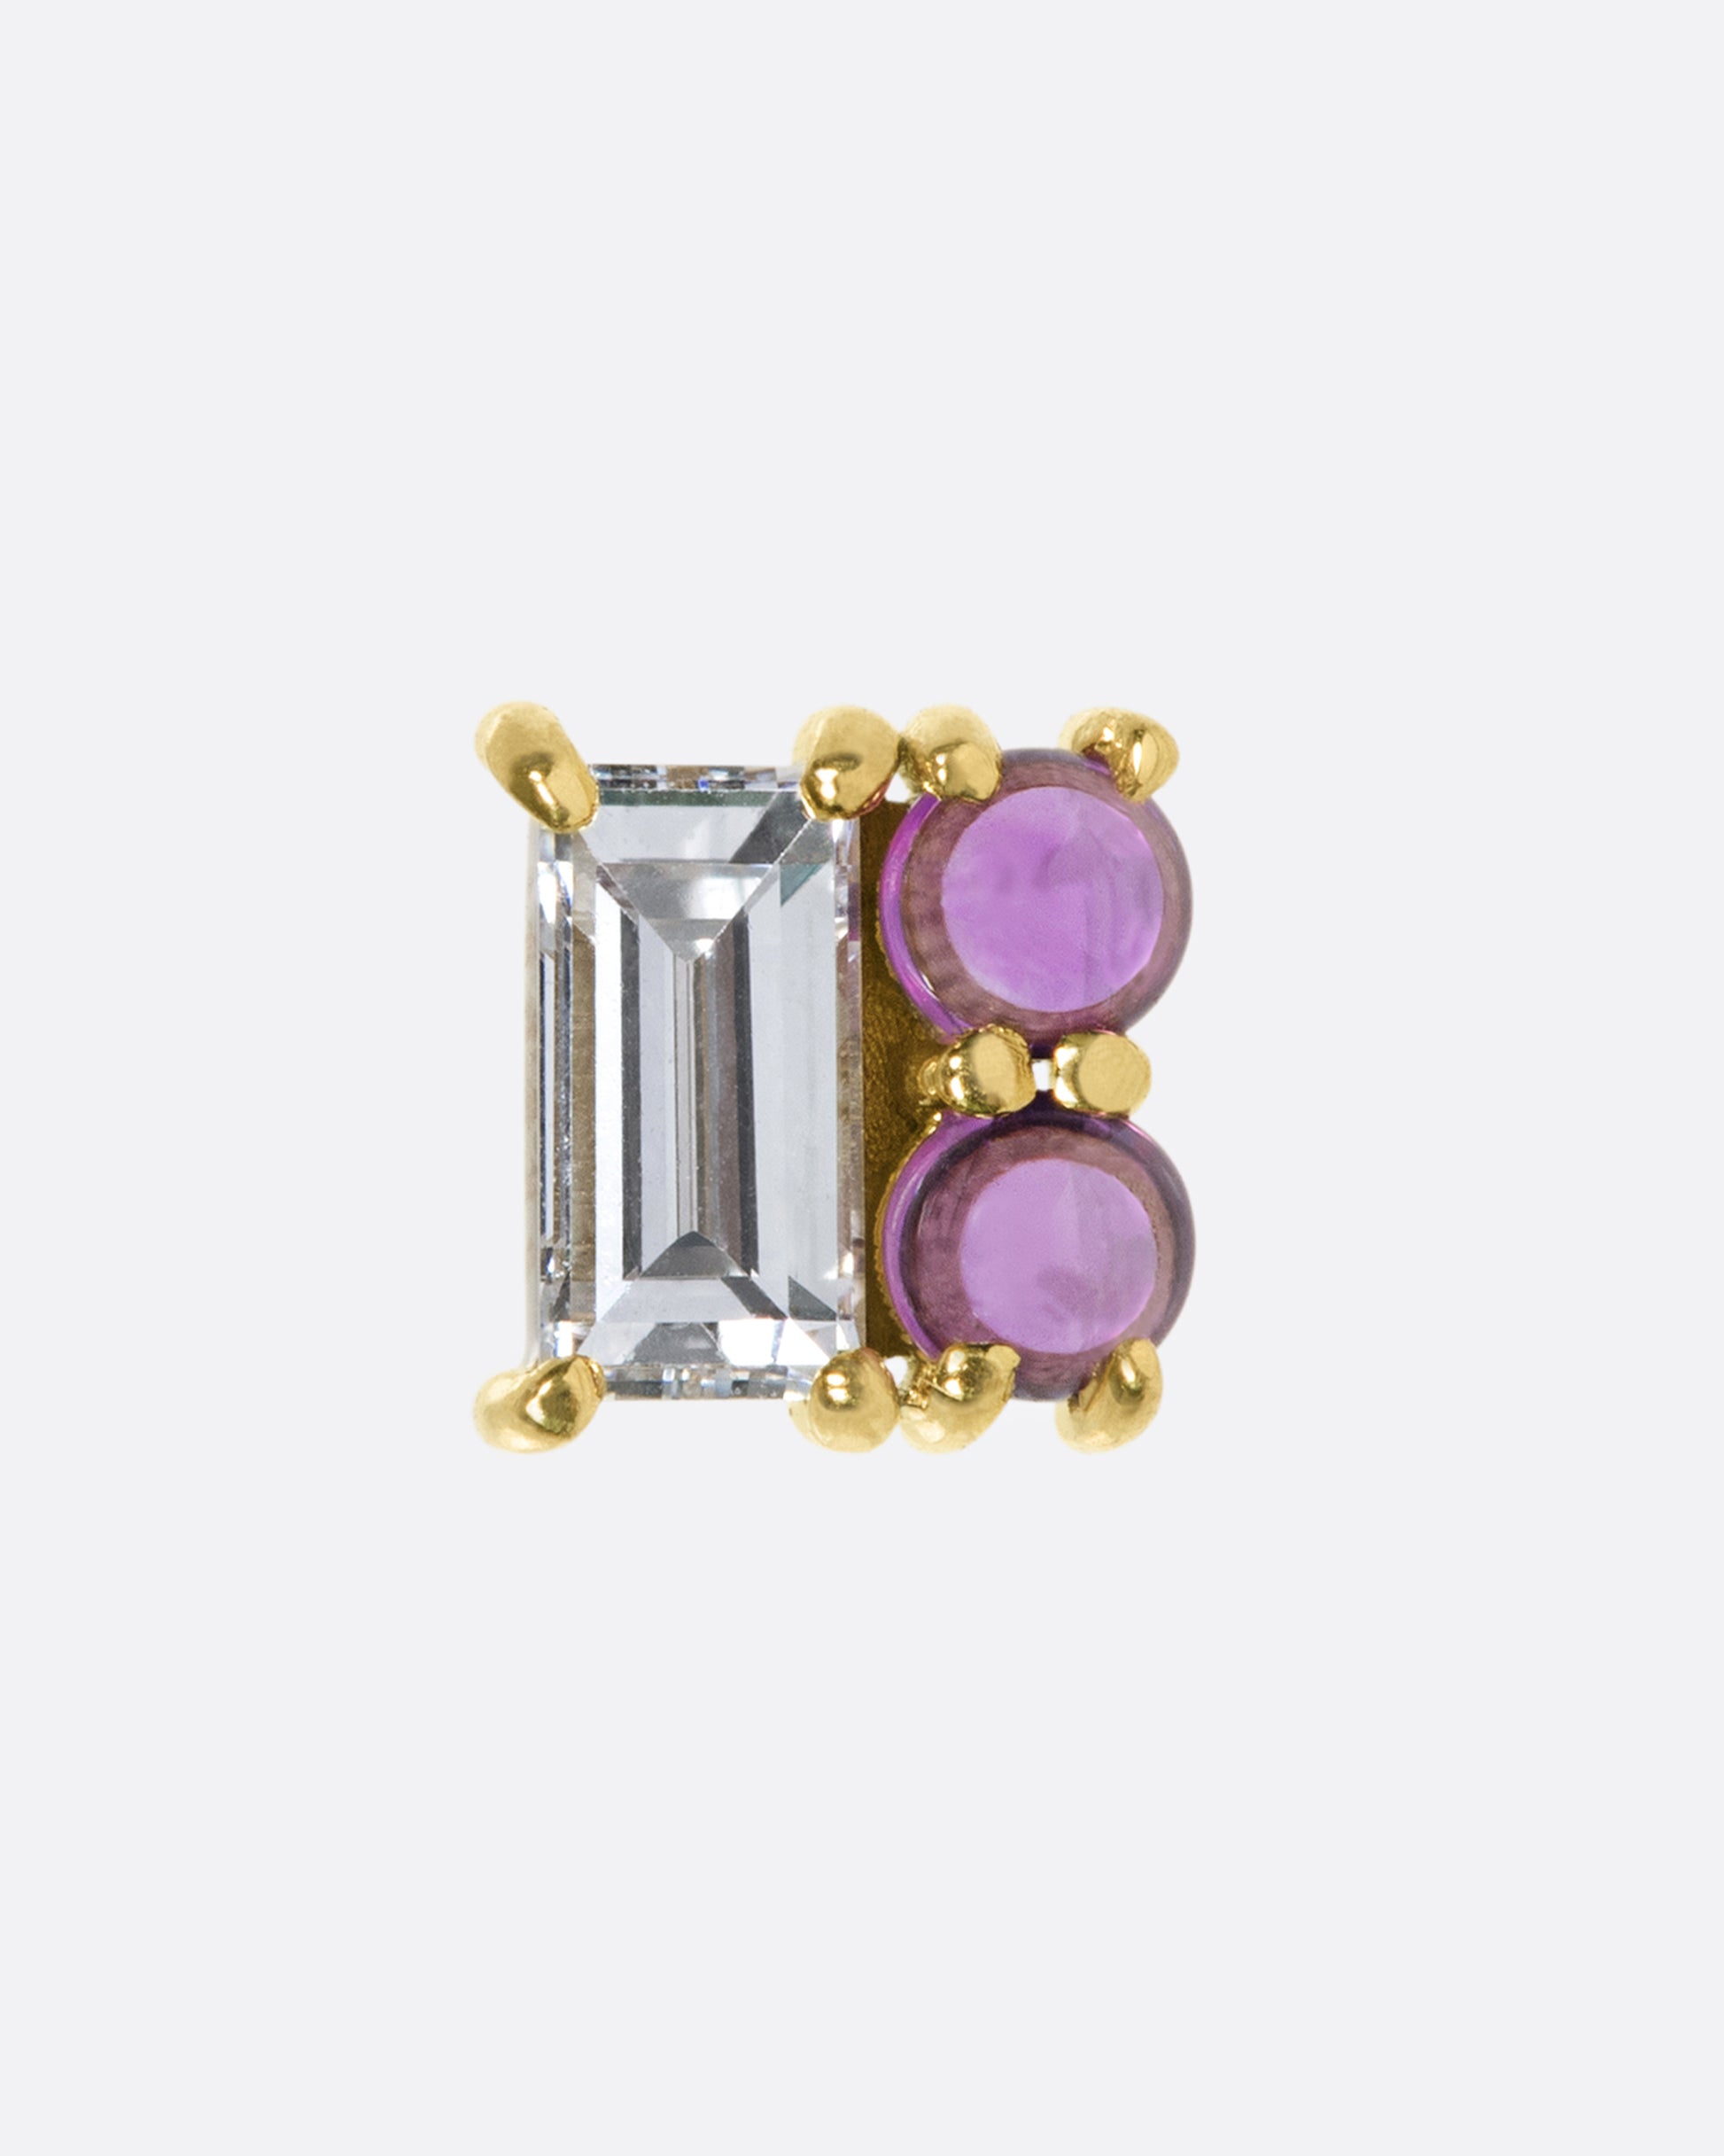 A square earring made up of a diamond baguette and two ruby cabochons; a combination of color, shape, and shine.